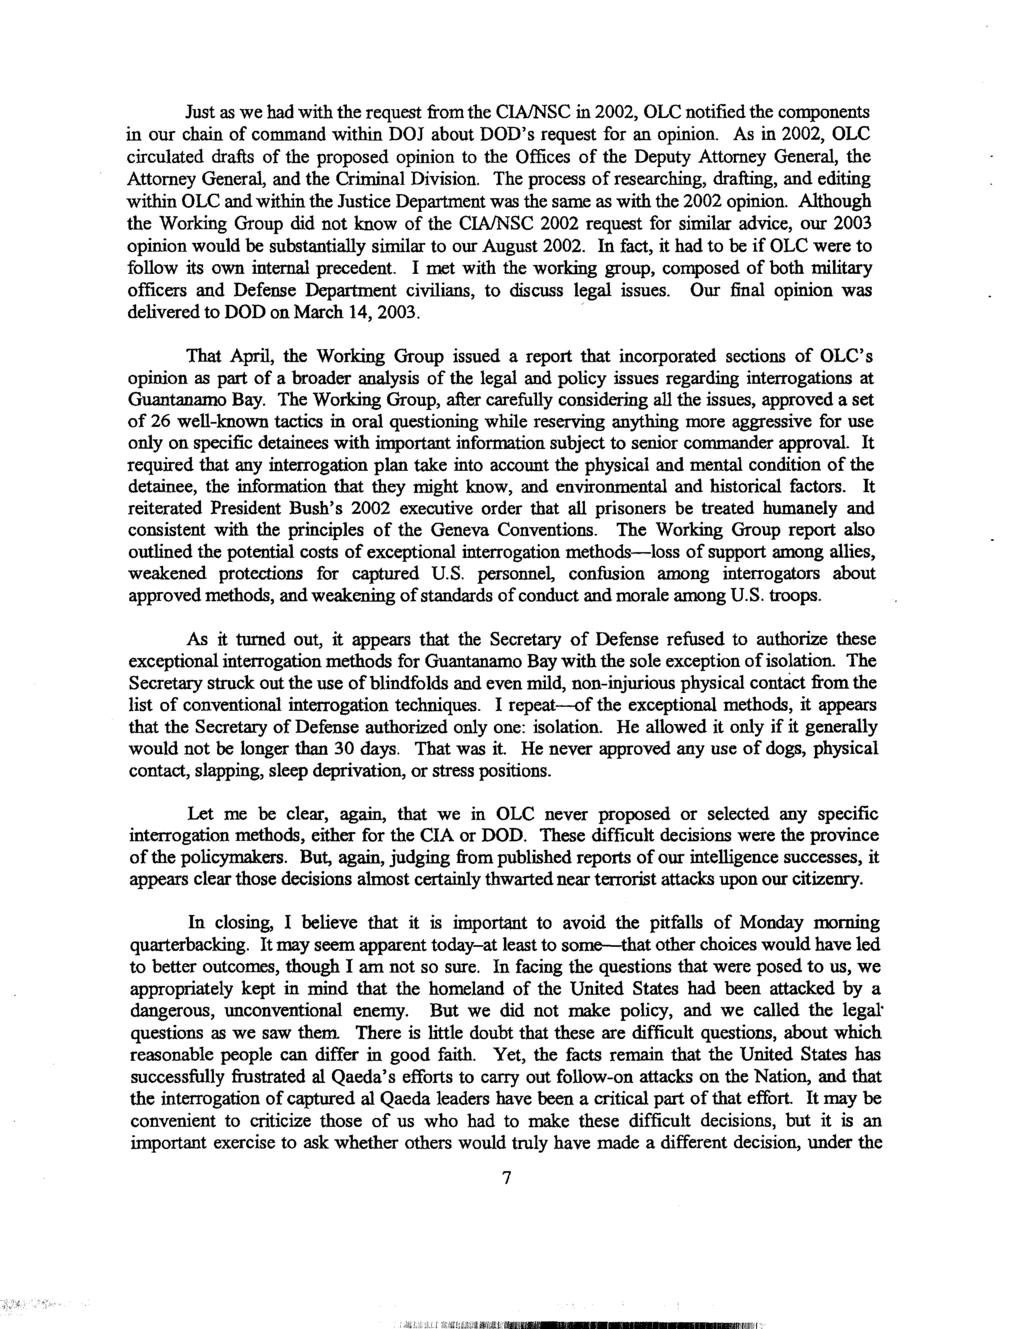 lall aguitiosionsimmumstmosansammemmumarrav Just as we had with the request from the CIAJNSC in 2002, OLC notified the components in our chain of command within DOJ about DOD's request for an opinion.